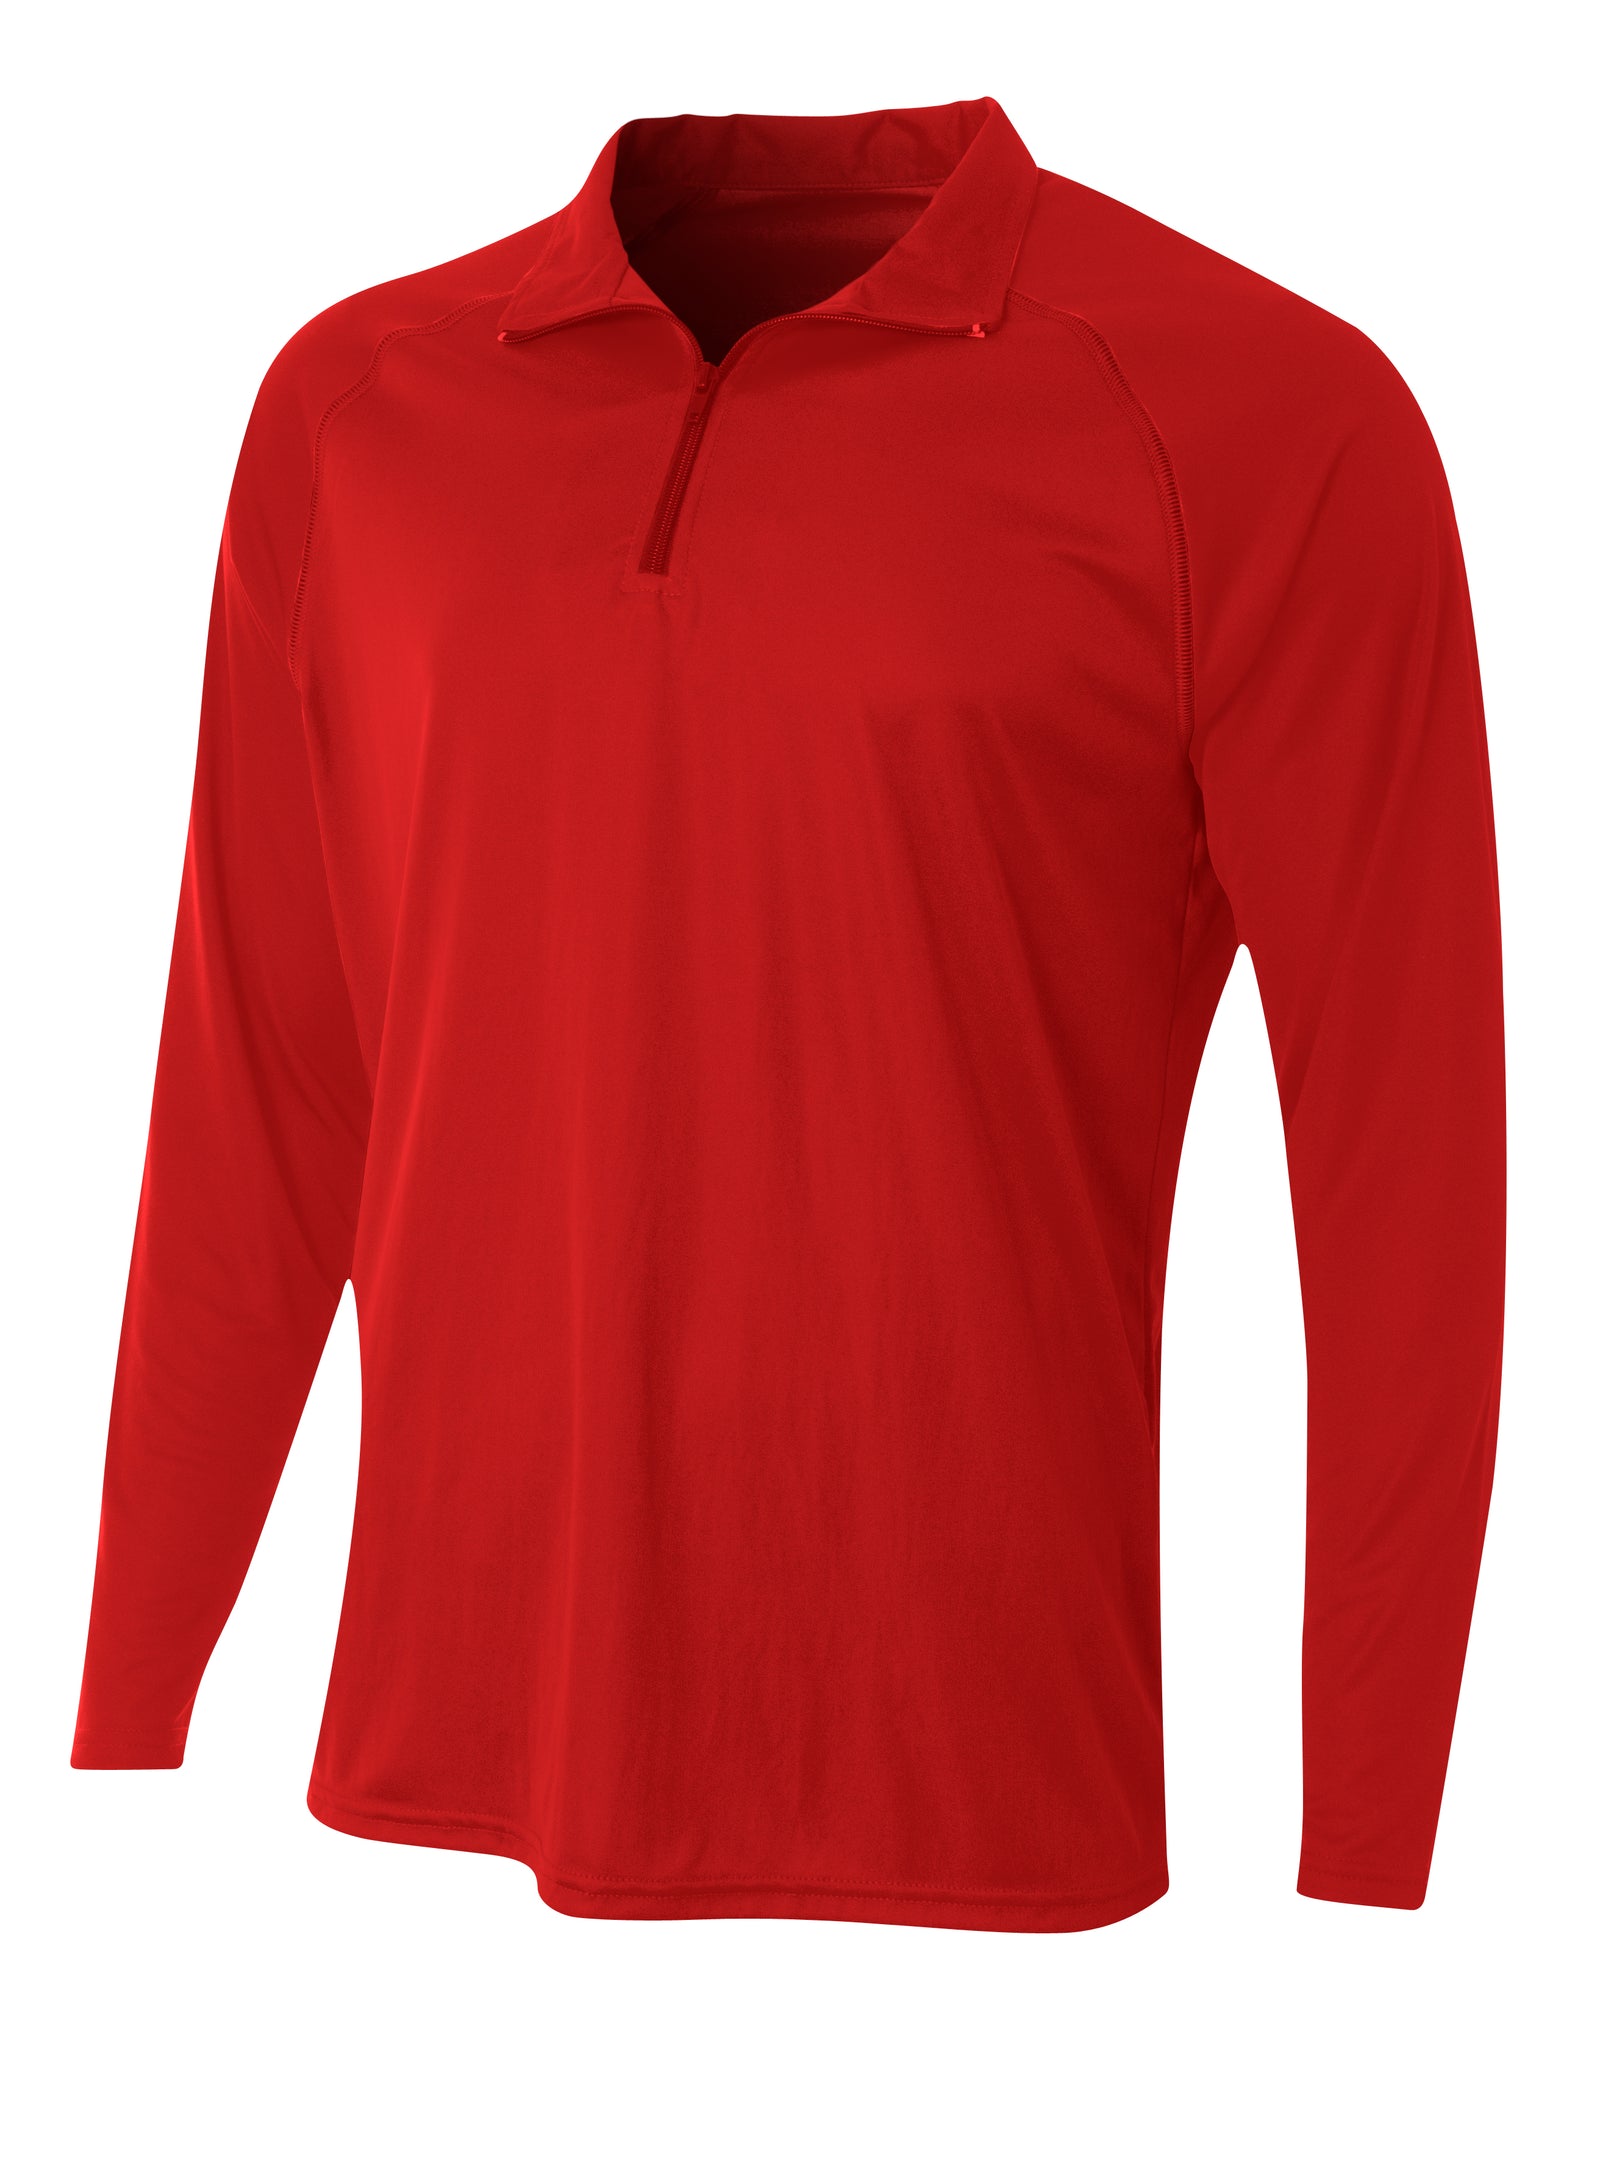 Scarlet A4 Daily 1/4 Zip